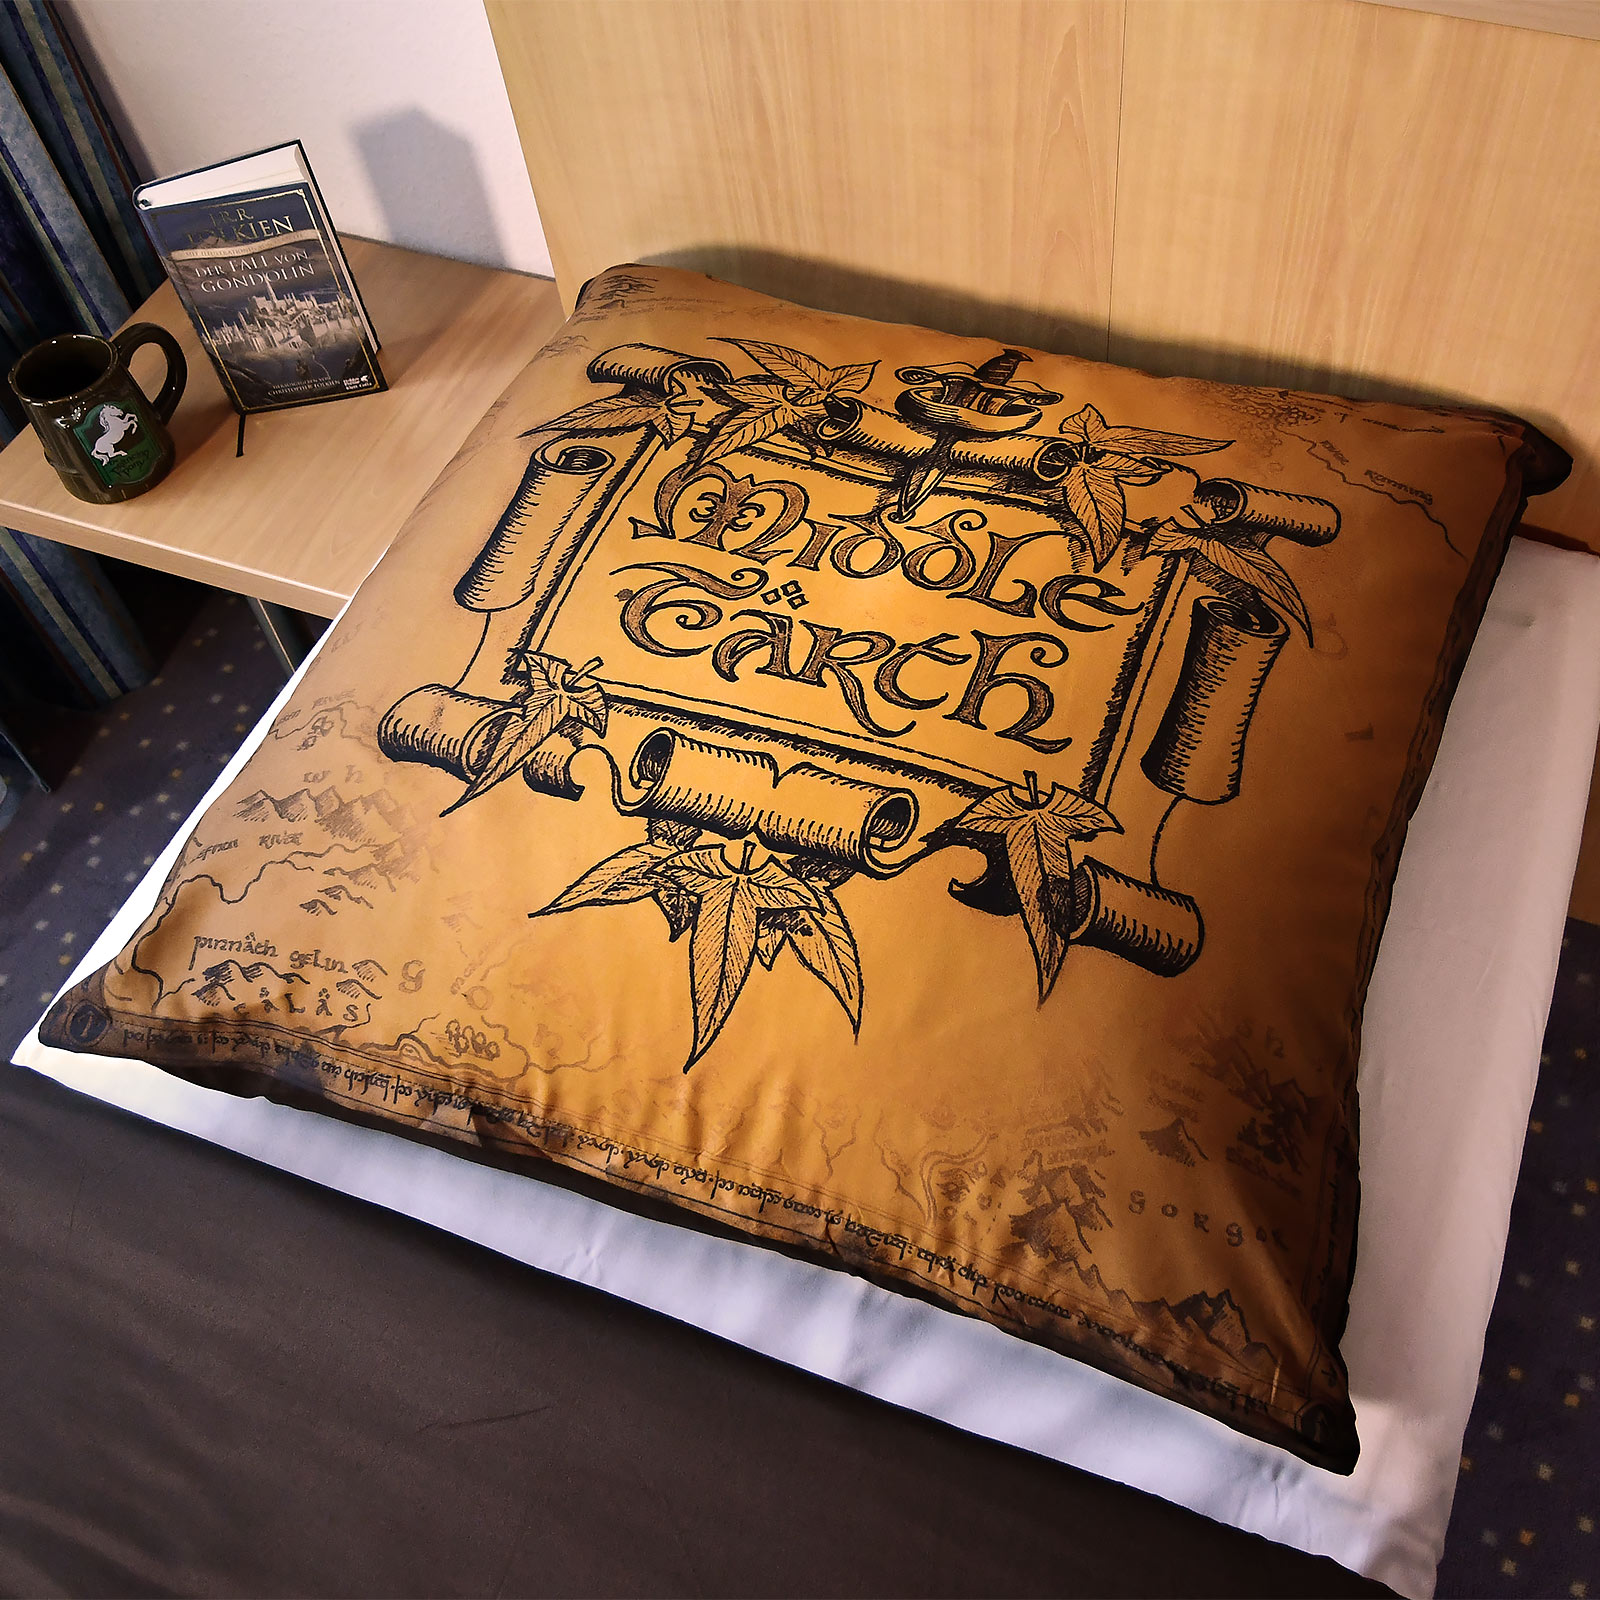 Lord of the Rings - Middle Earth Map Bedding